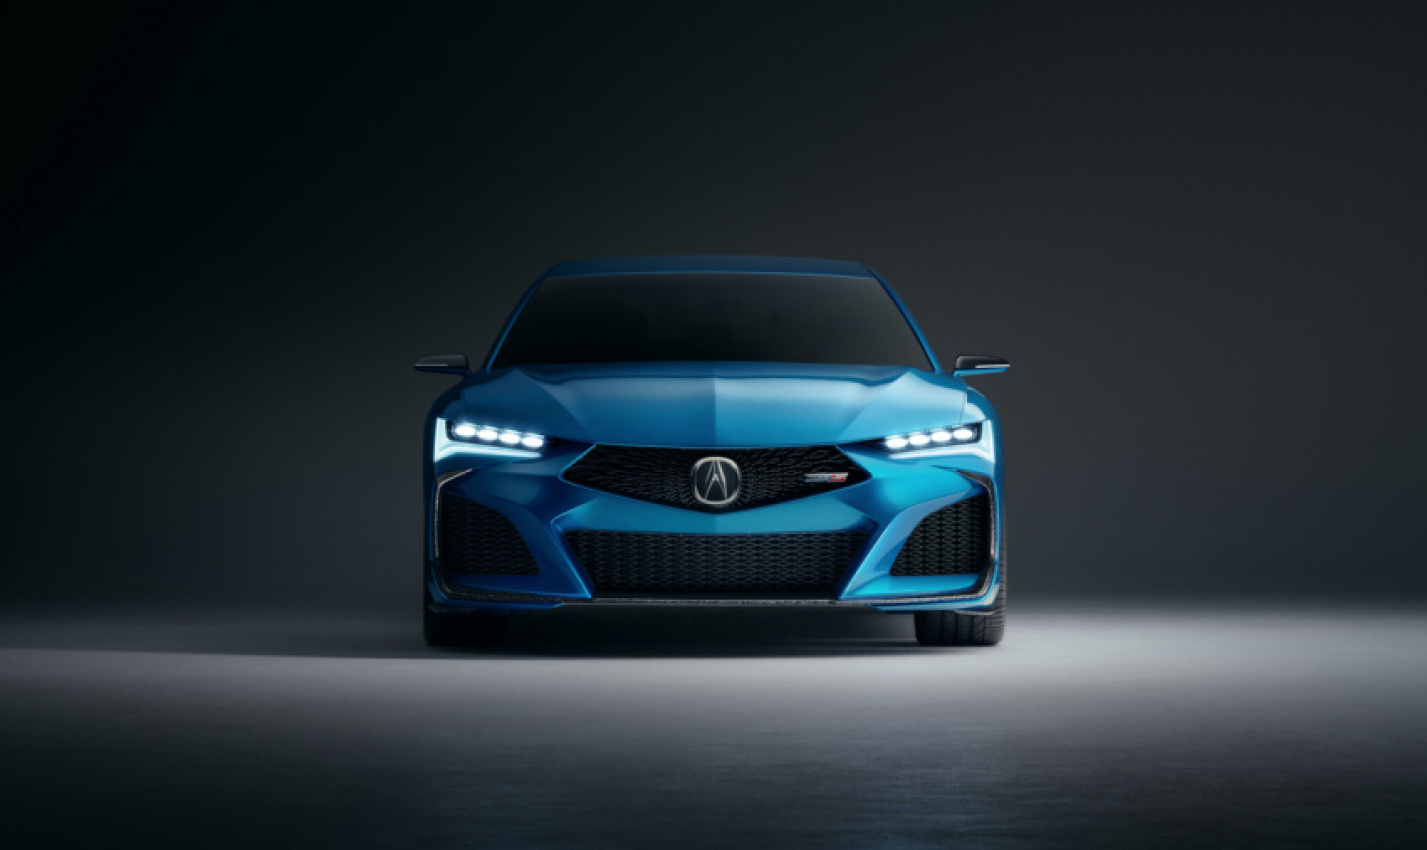 acura, autos, cars, acura precision concept, concept car, global debut, monterey car week, pebble beach concours d'elegance, prototype, type s concept, acura type s concept sets the stage for return of type s performance variants [w/video]